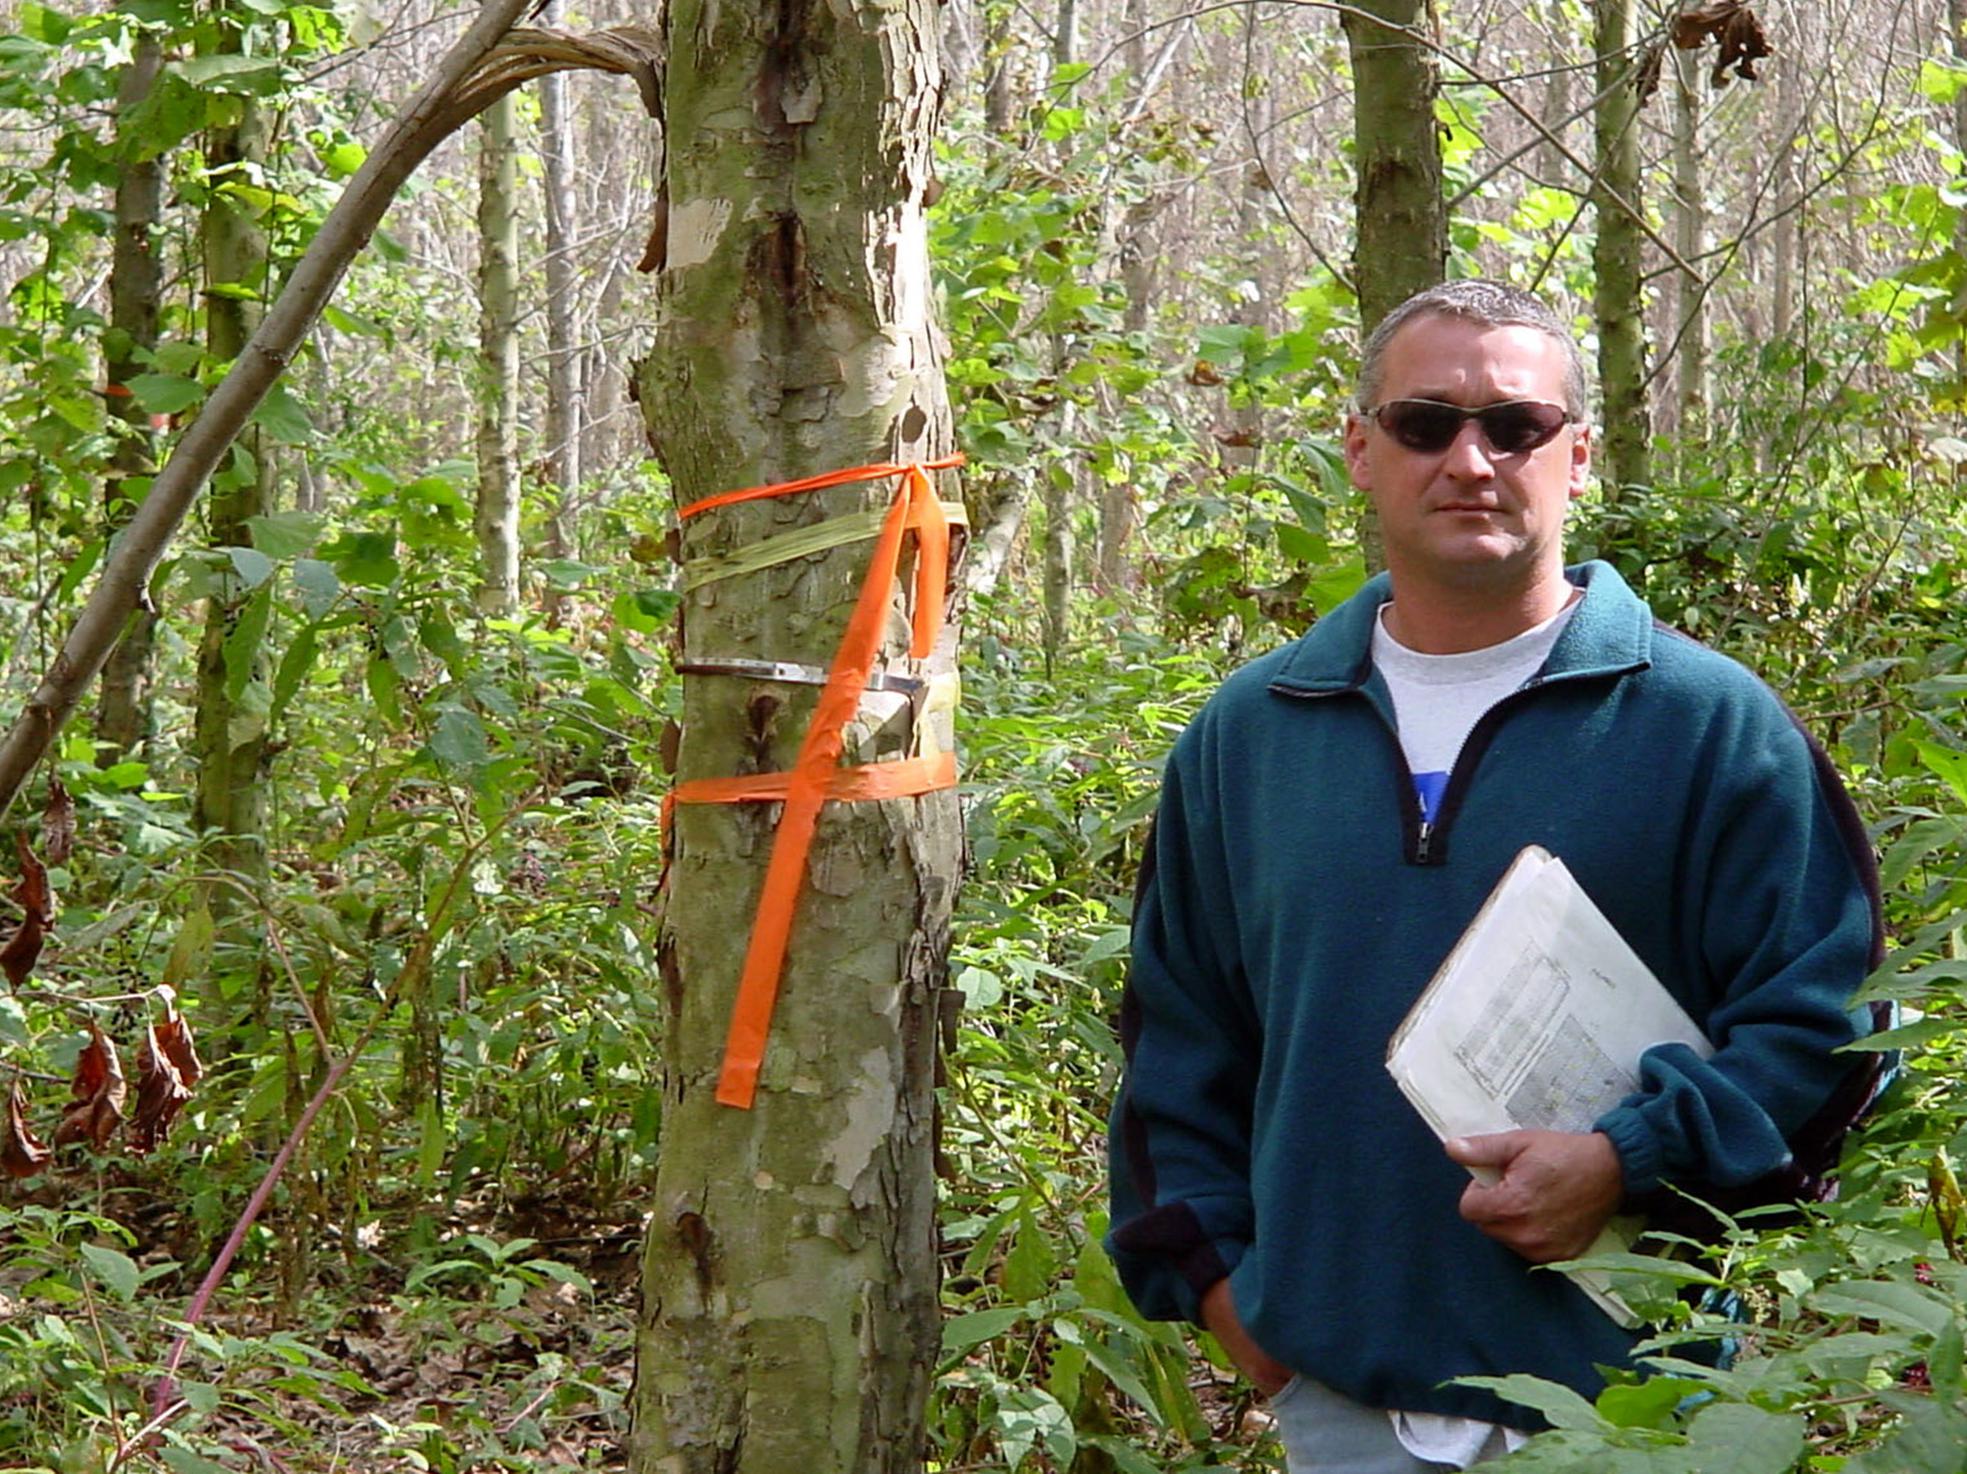 Man holding a clipboard looks at camera while standing in a wooded area beside a tree with orange ribbons tied around the trunk at shoulder height.